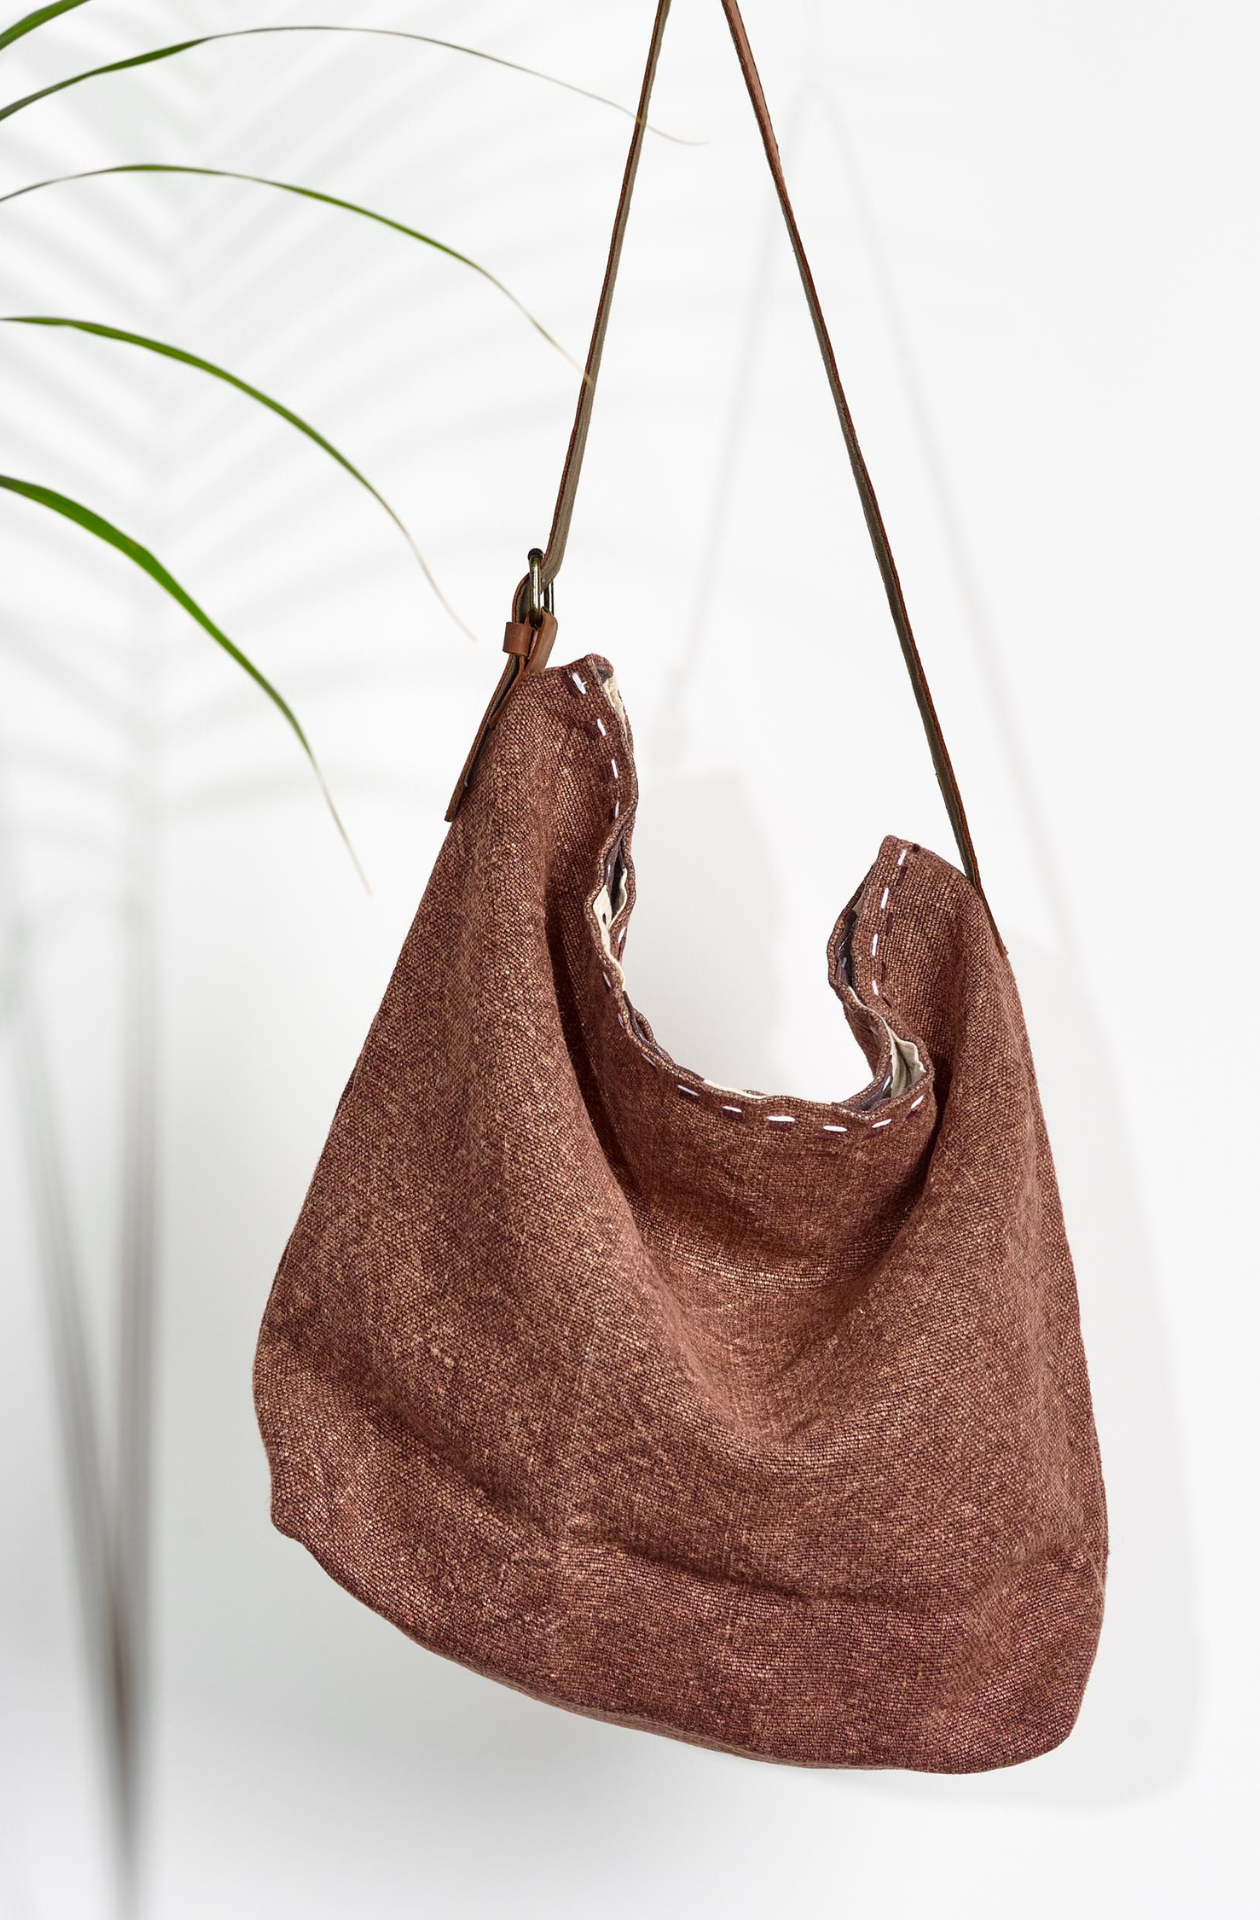 Mocha All the world Jute Bag. The washed warm medium brown is contrasted with two lines of black and white stitching at the top of the bag in between the warm brown leather strap with a golden buckle. 